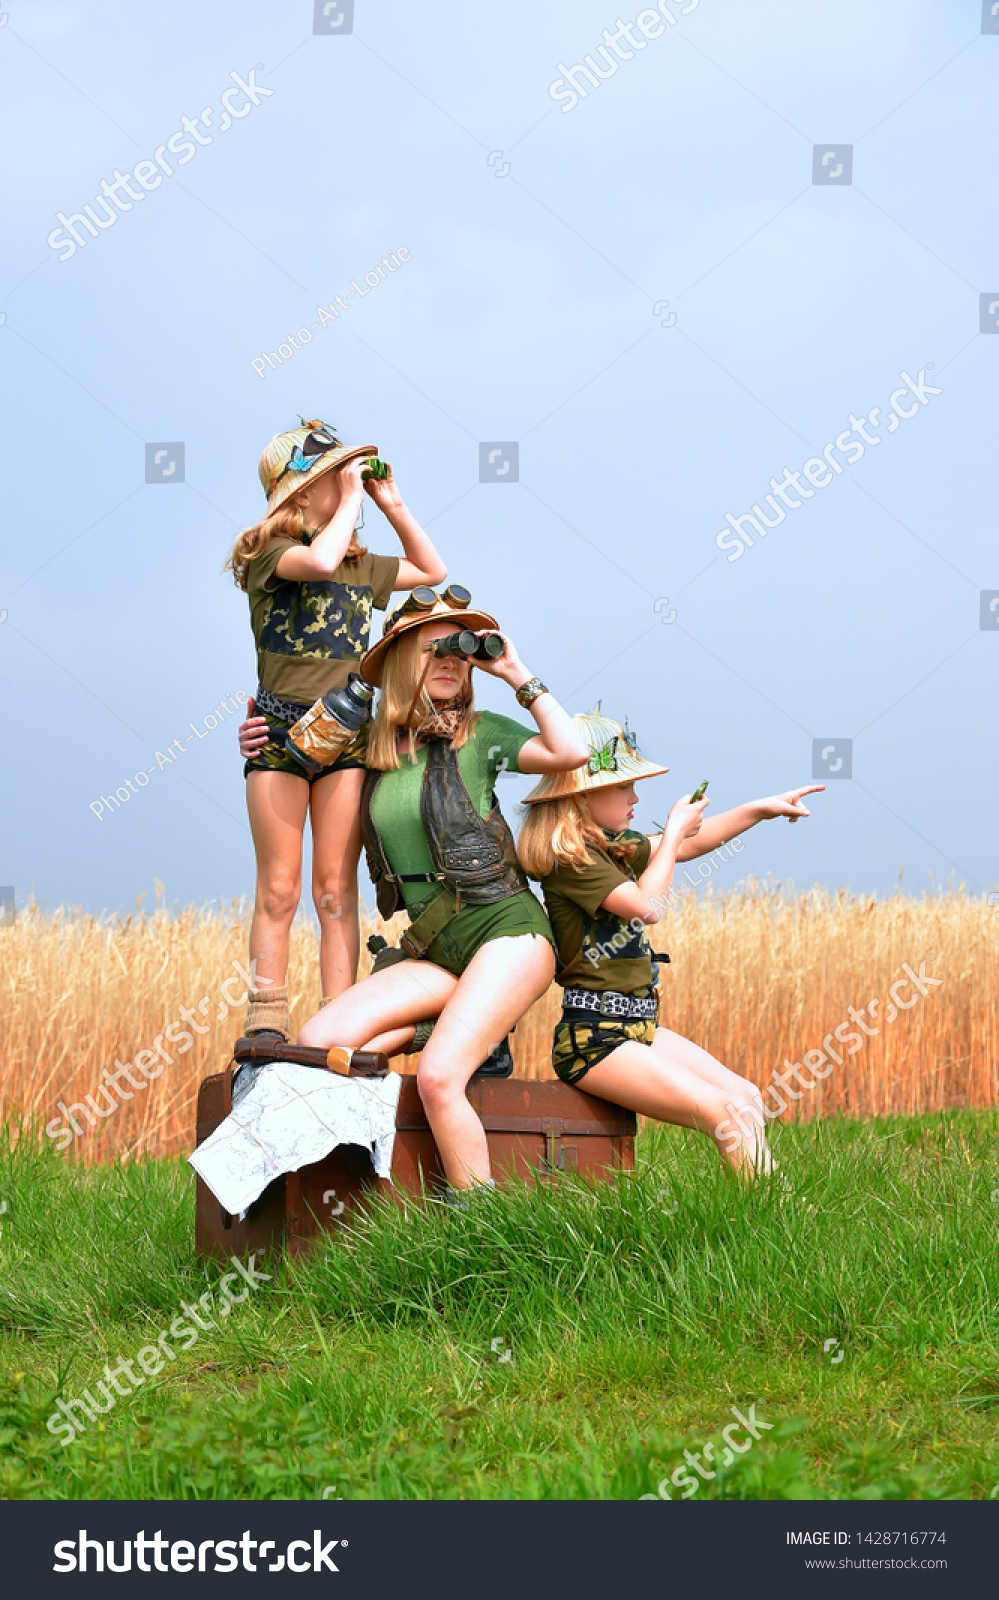 Twin young sisters and an adult girl dress up as explorers.
They pose in the outdoors dressed with jungle hats and
khaki safari clothes. #1428716774